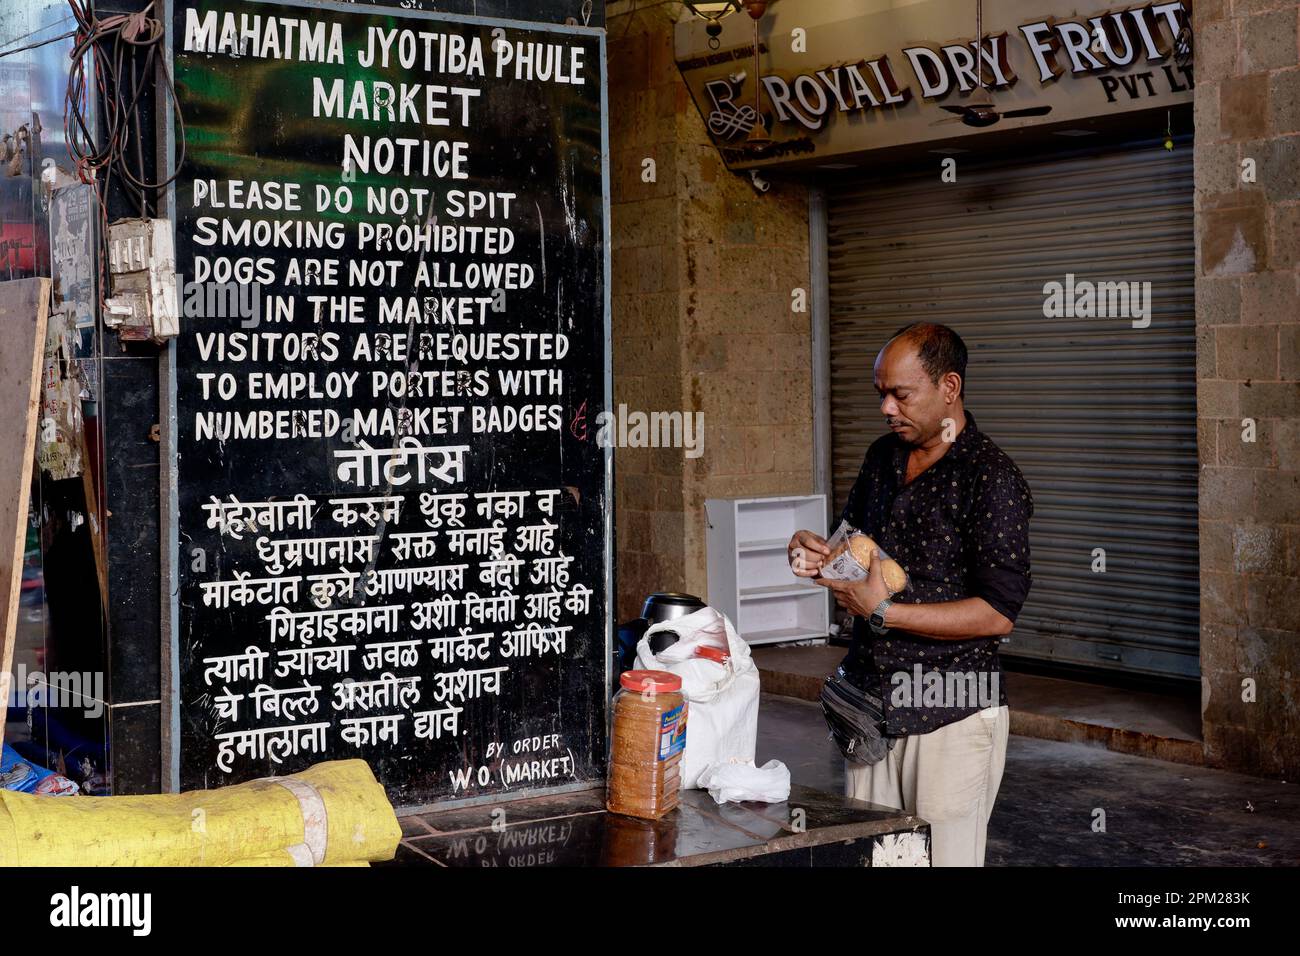 A notice board in Mahatma Jyotiba Phule Market (Crawford Market)  Mumbai, India, prohibits smoking and dogs, and requests to only employ legal porters Stock Photo